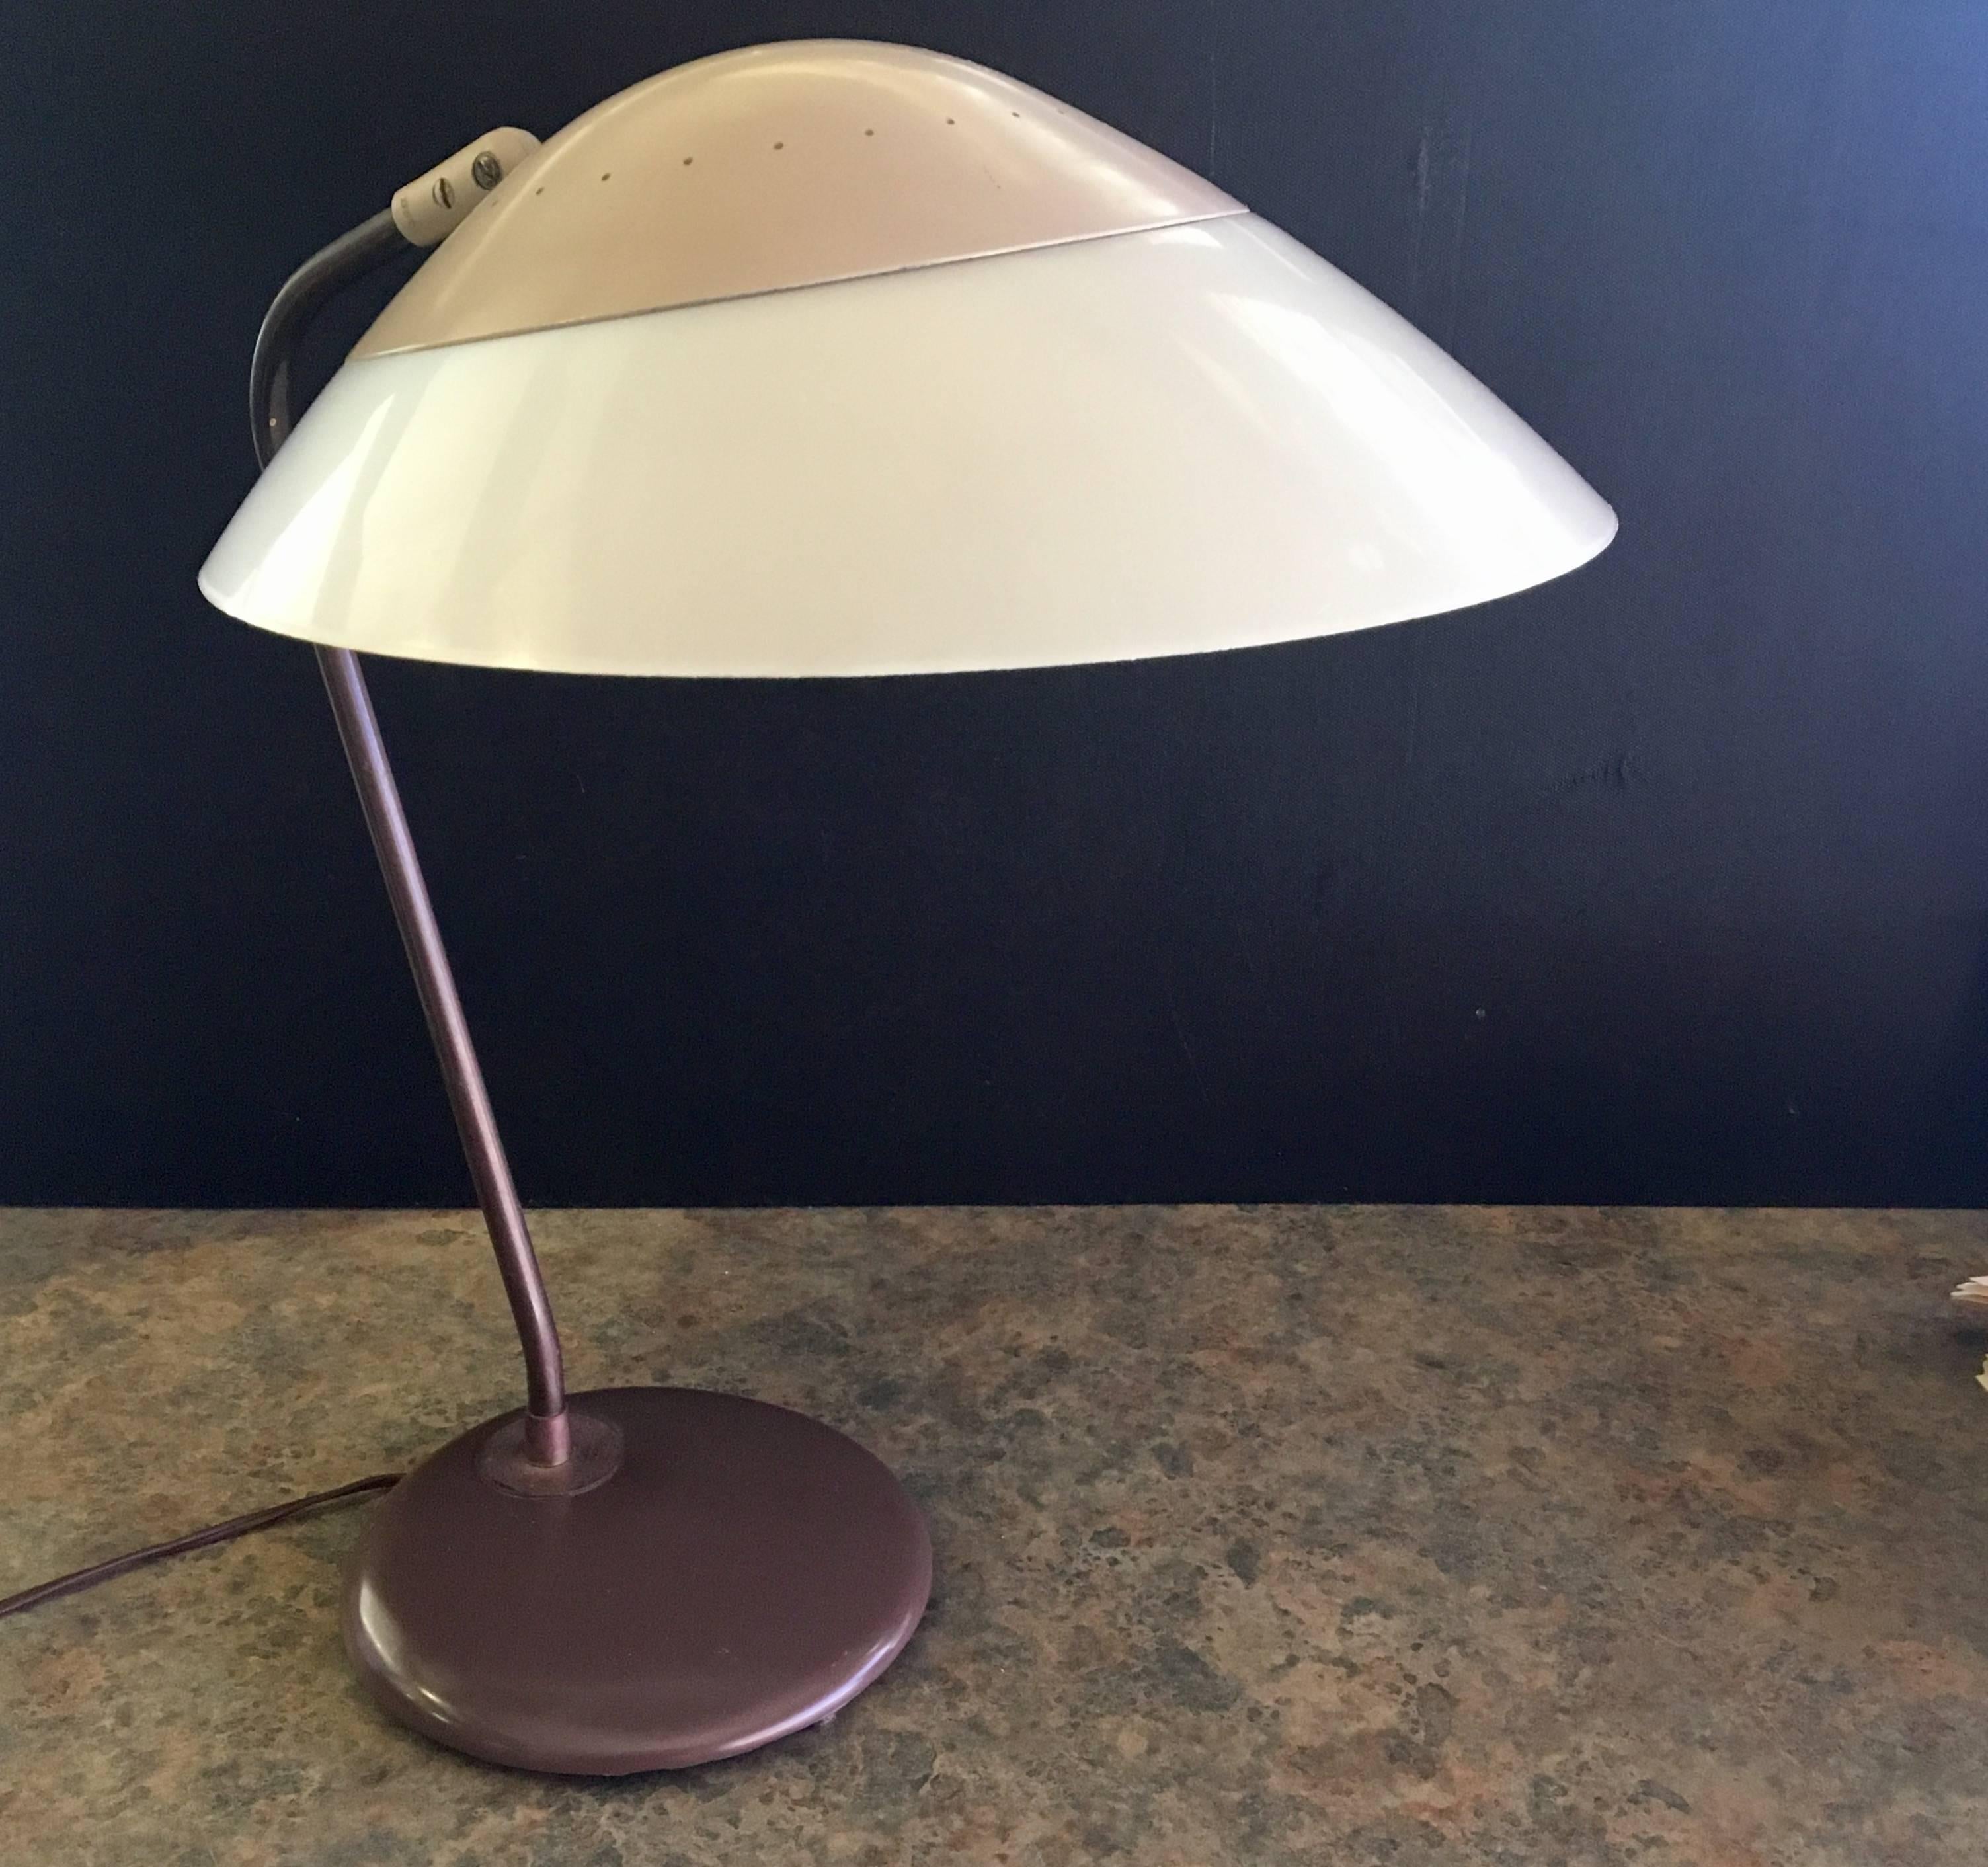 1950s original desk or table lamp designed by Gerald Thurston for Lightolier. Multi-Directional lampshade moves up and down and side to side with on / off switch. All in it's original vintage finish and condition with a hard to find plastic